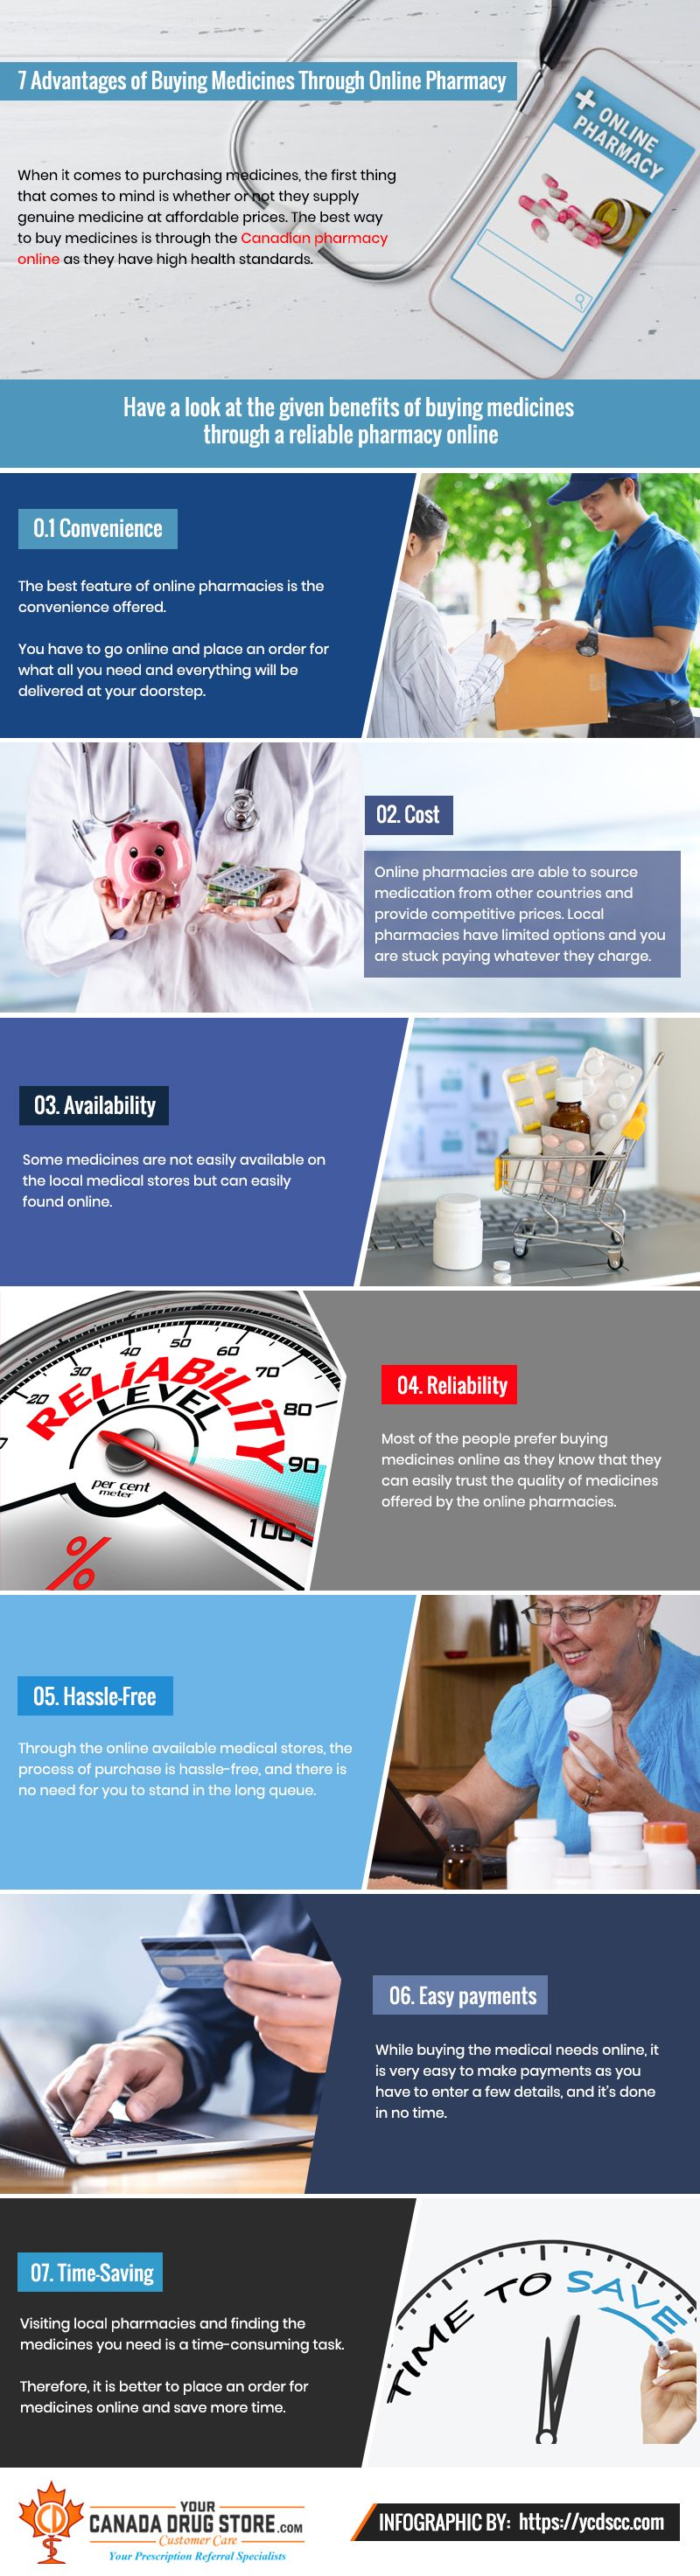 7 Advantages of Buying Medicines From an Online Pharmacy Infographic